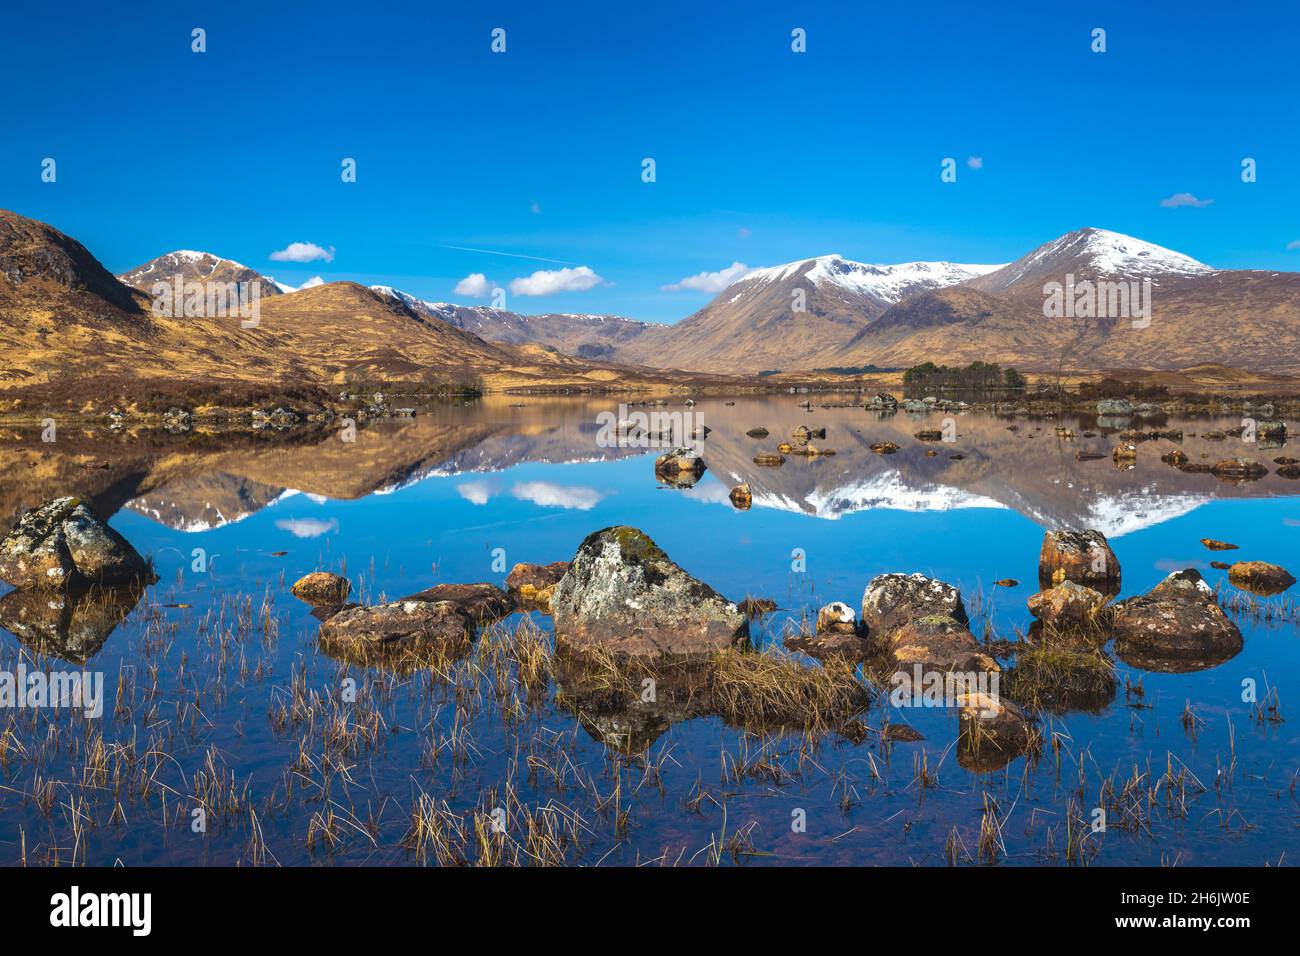 Lochan na h-Achlaise, The Black Mount, Lower Rannoch Moor, Argyll and Bute, Scotland, United Kingdom, Europe Stock Photo